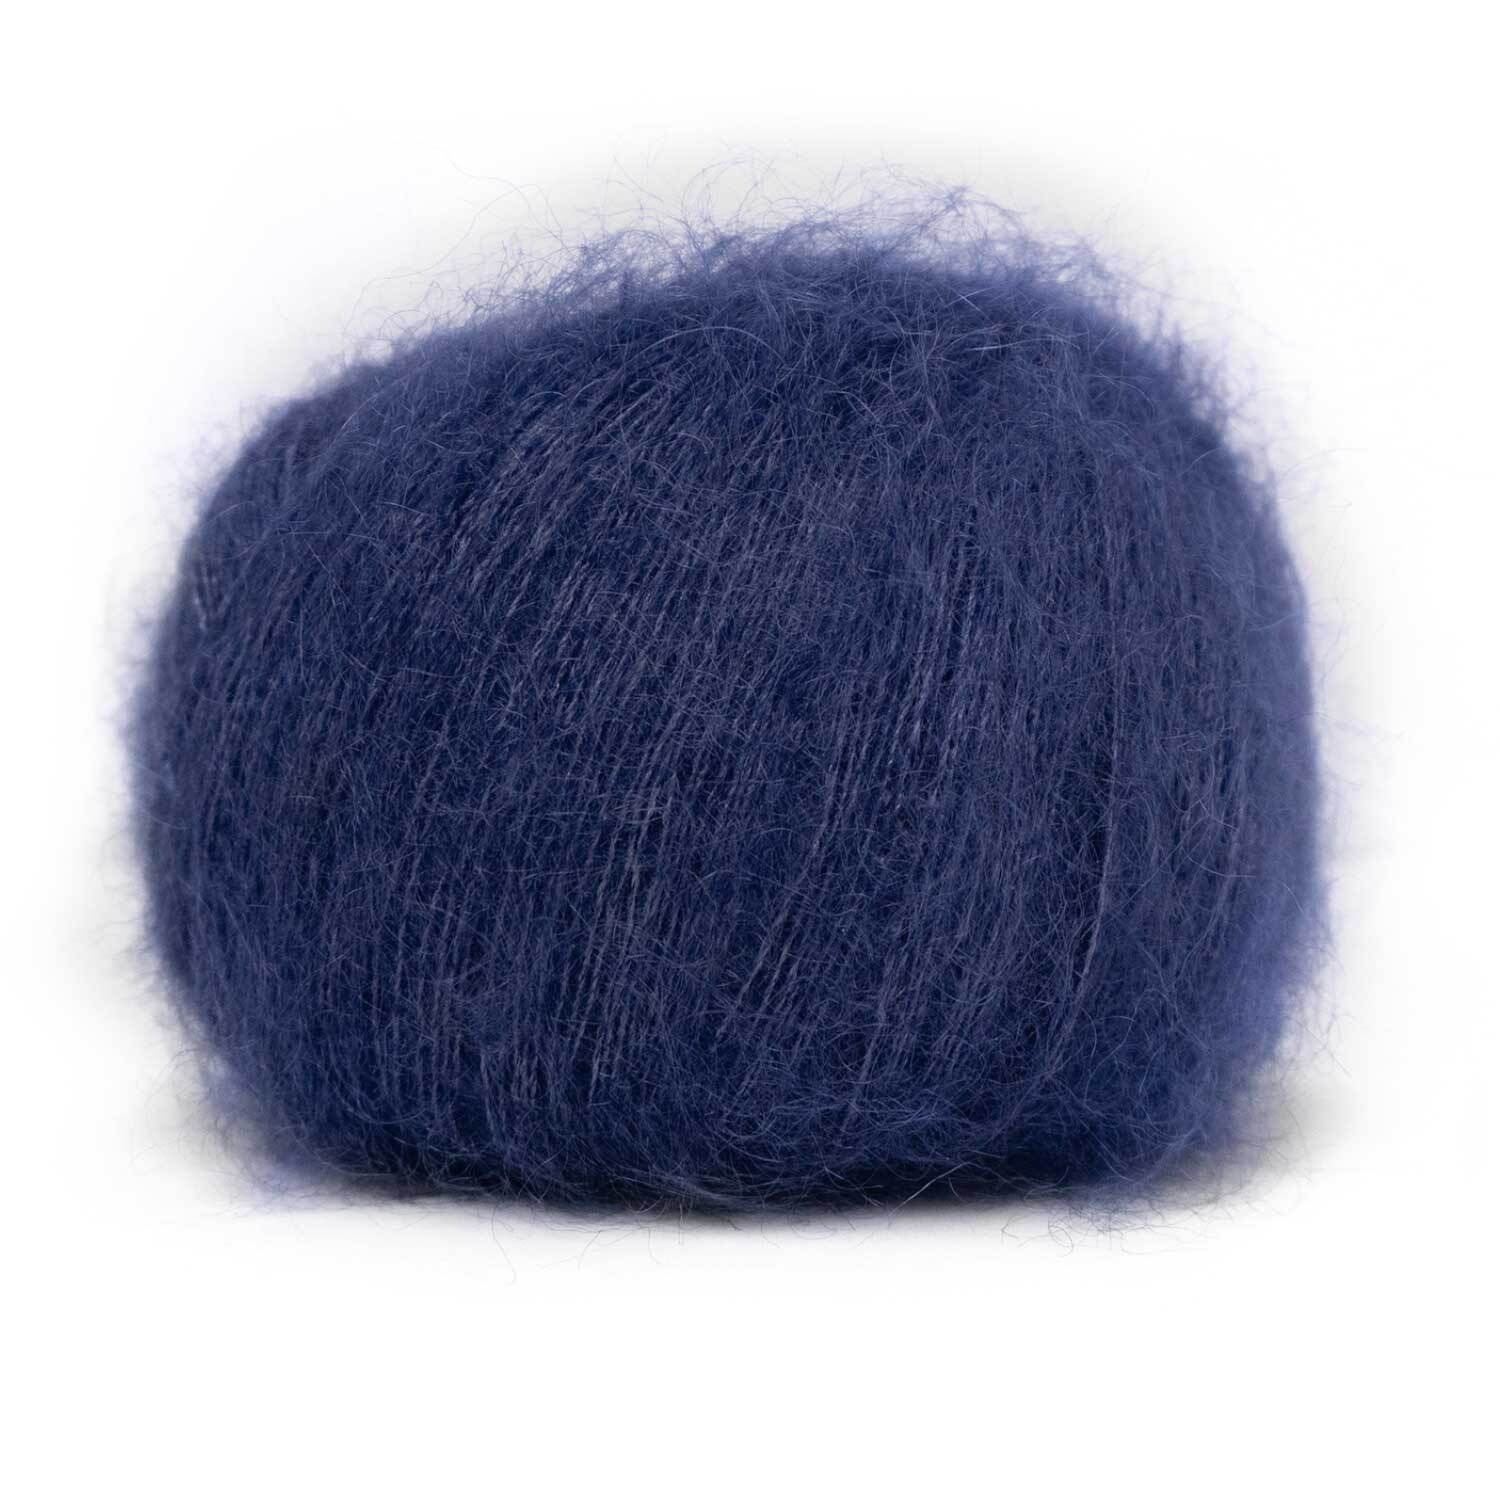 Pascuali Mohair Bliss - 811 Navy